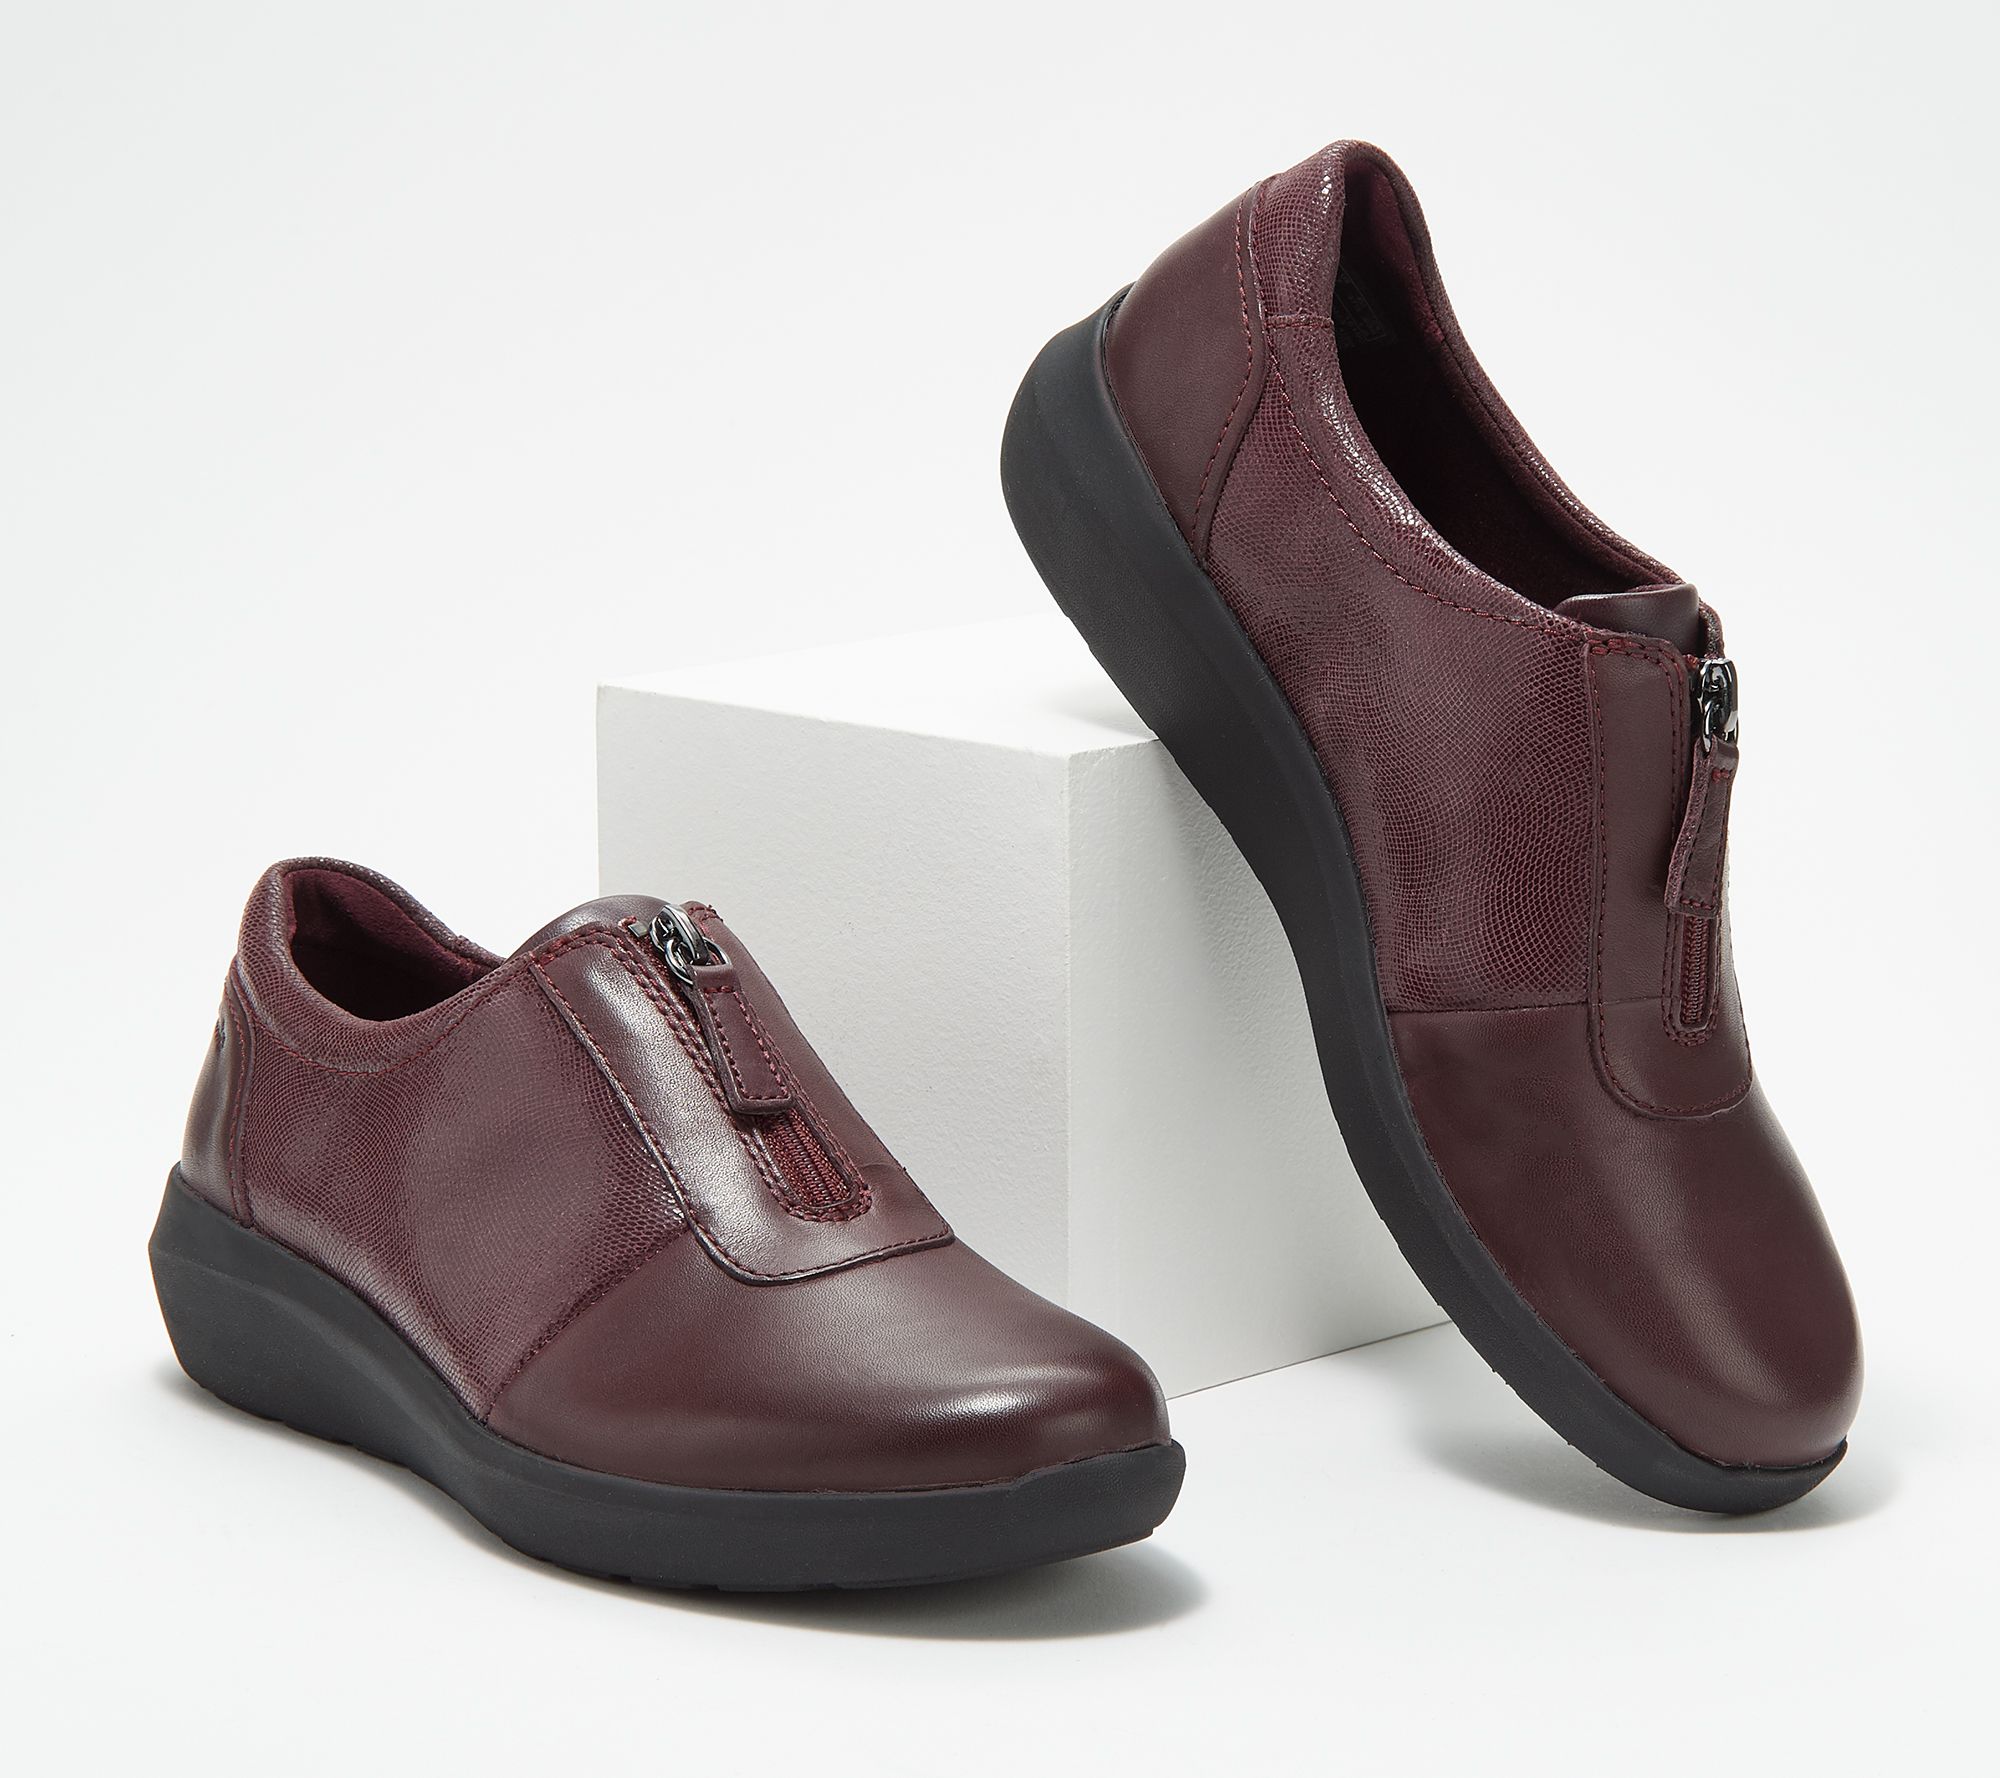 Clarks Collection Leather Slip-On Shoes 